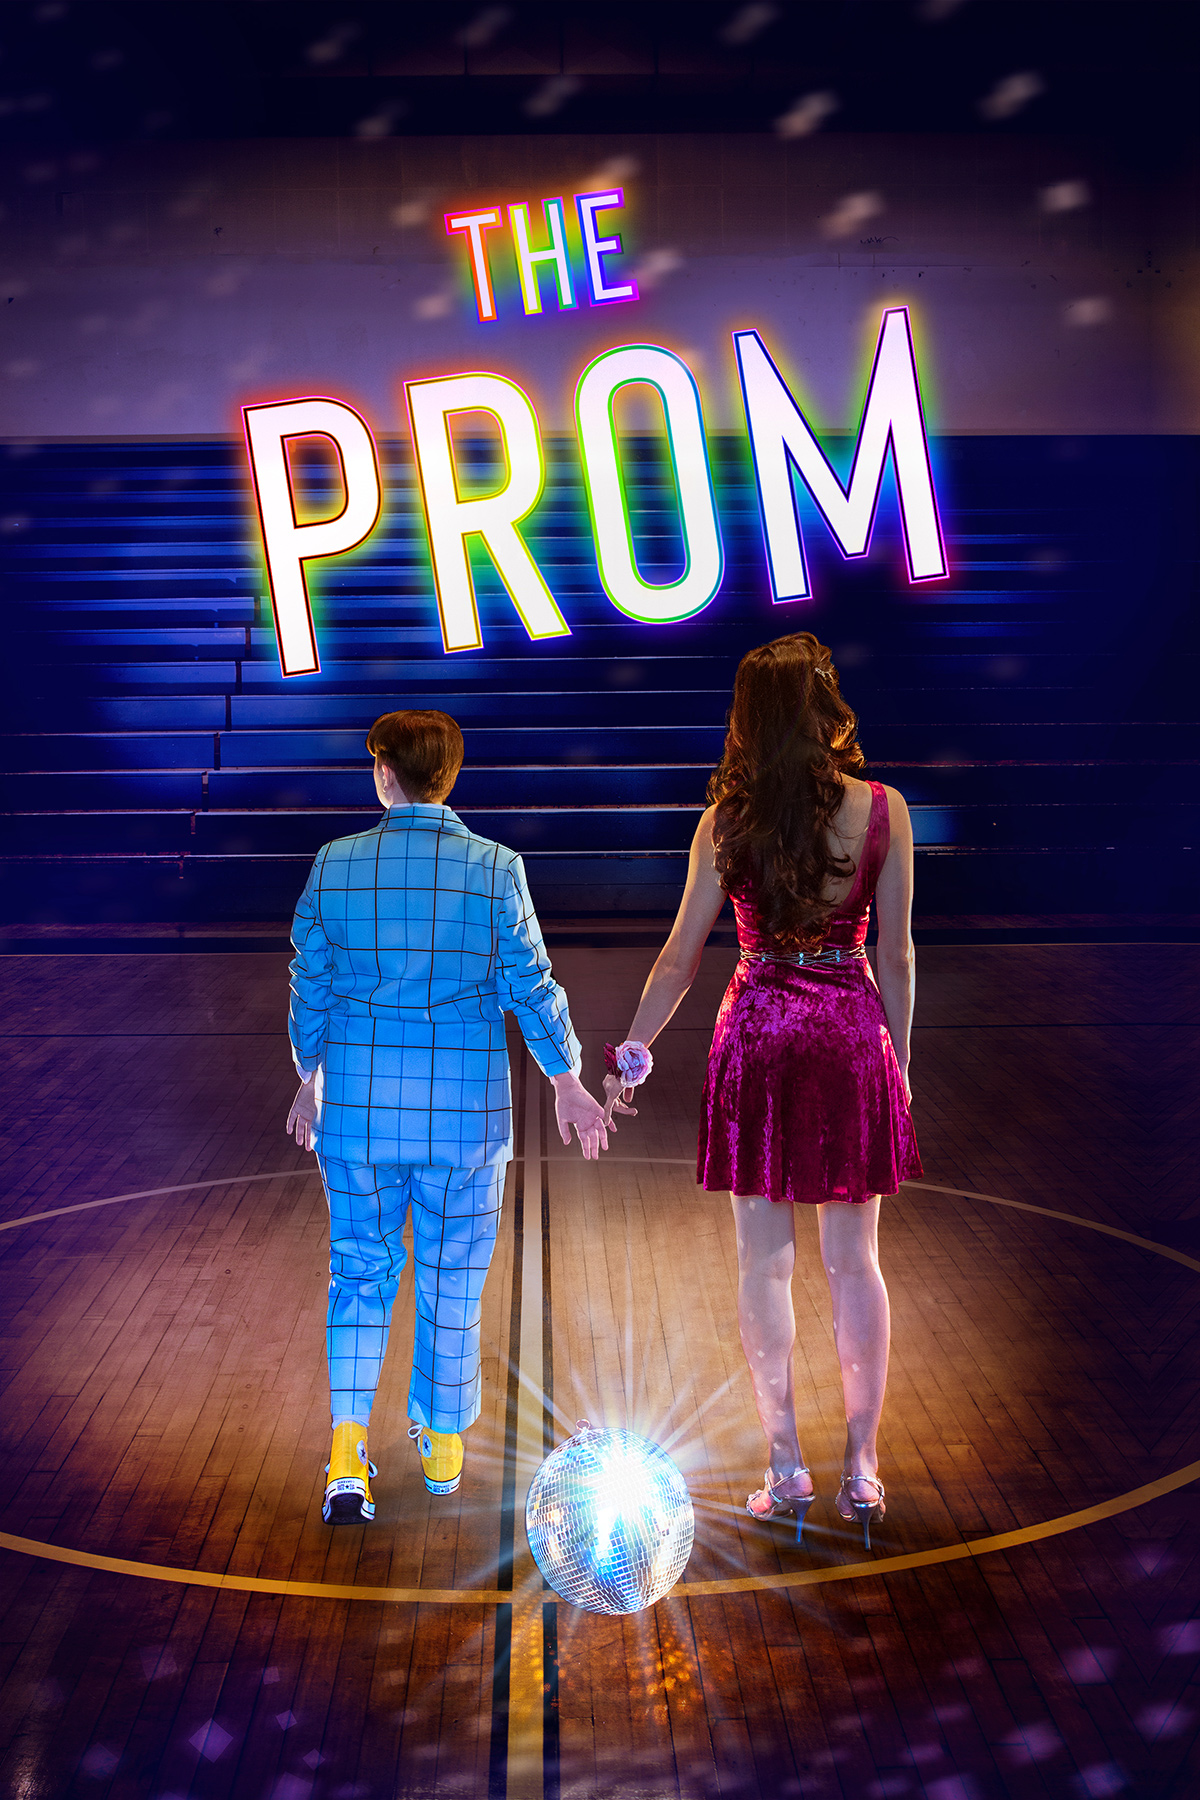 A queer couple holds hands, their back turned to the audience in an empty gym near a disco ball. The Prom is in text above them.